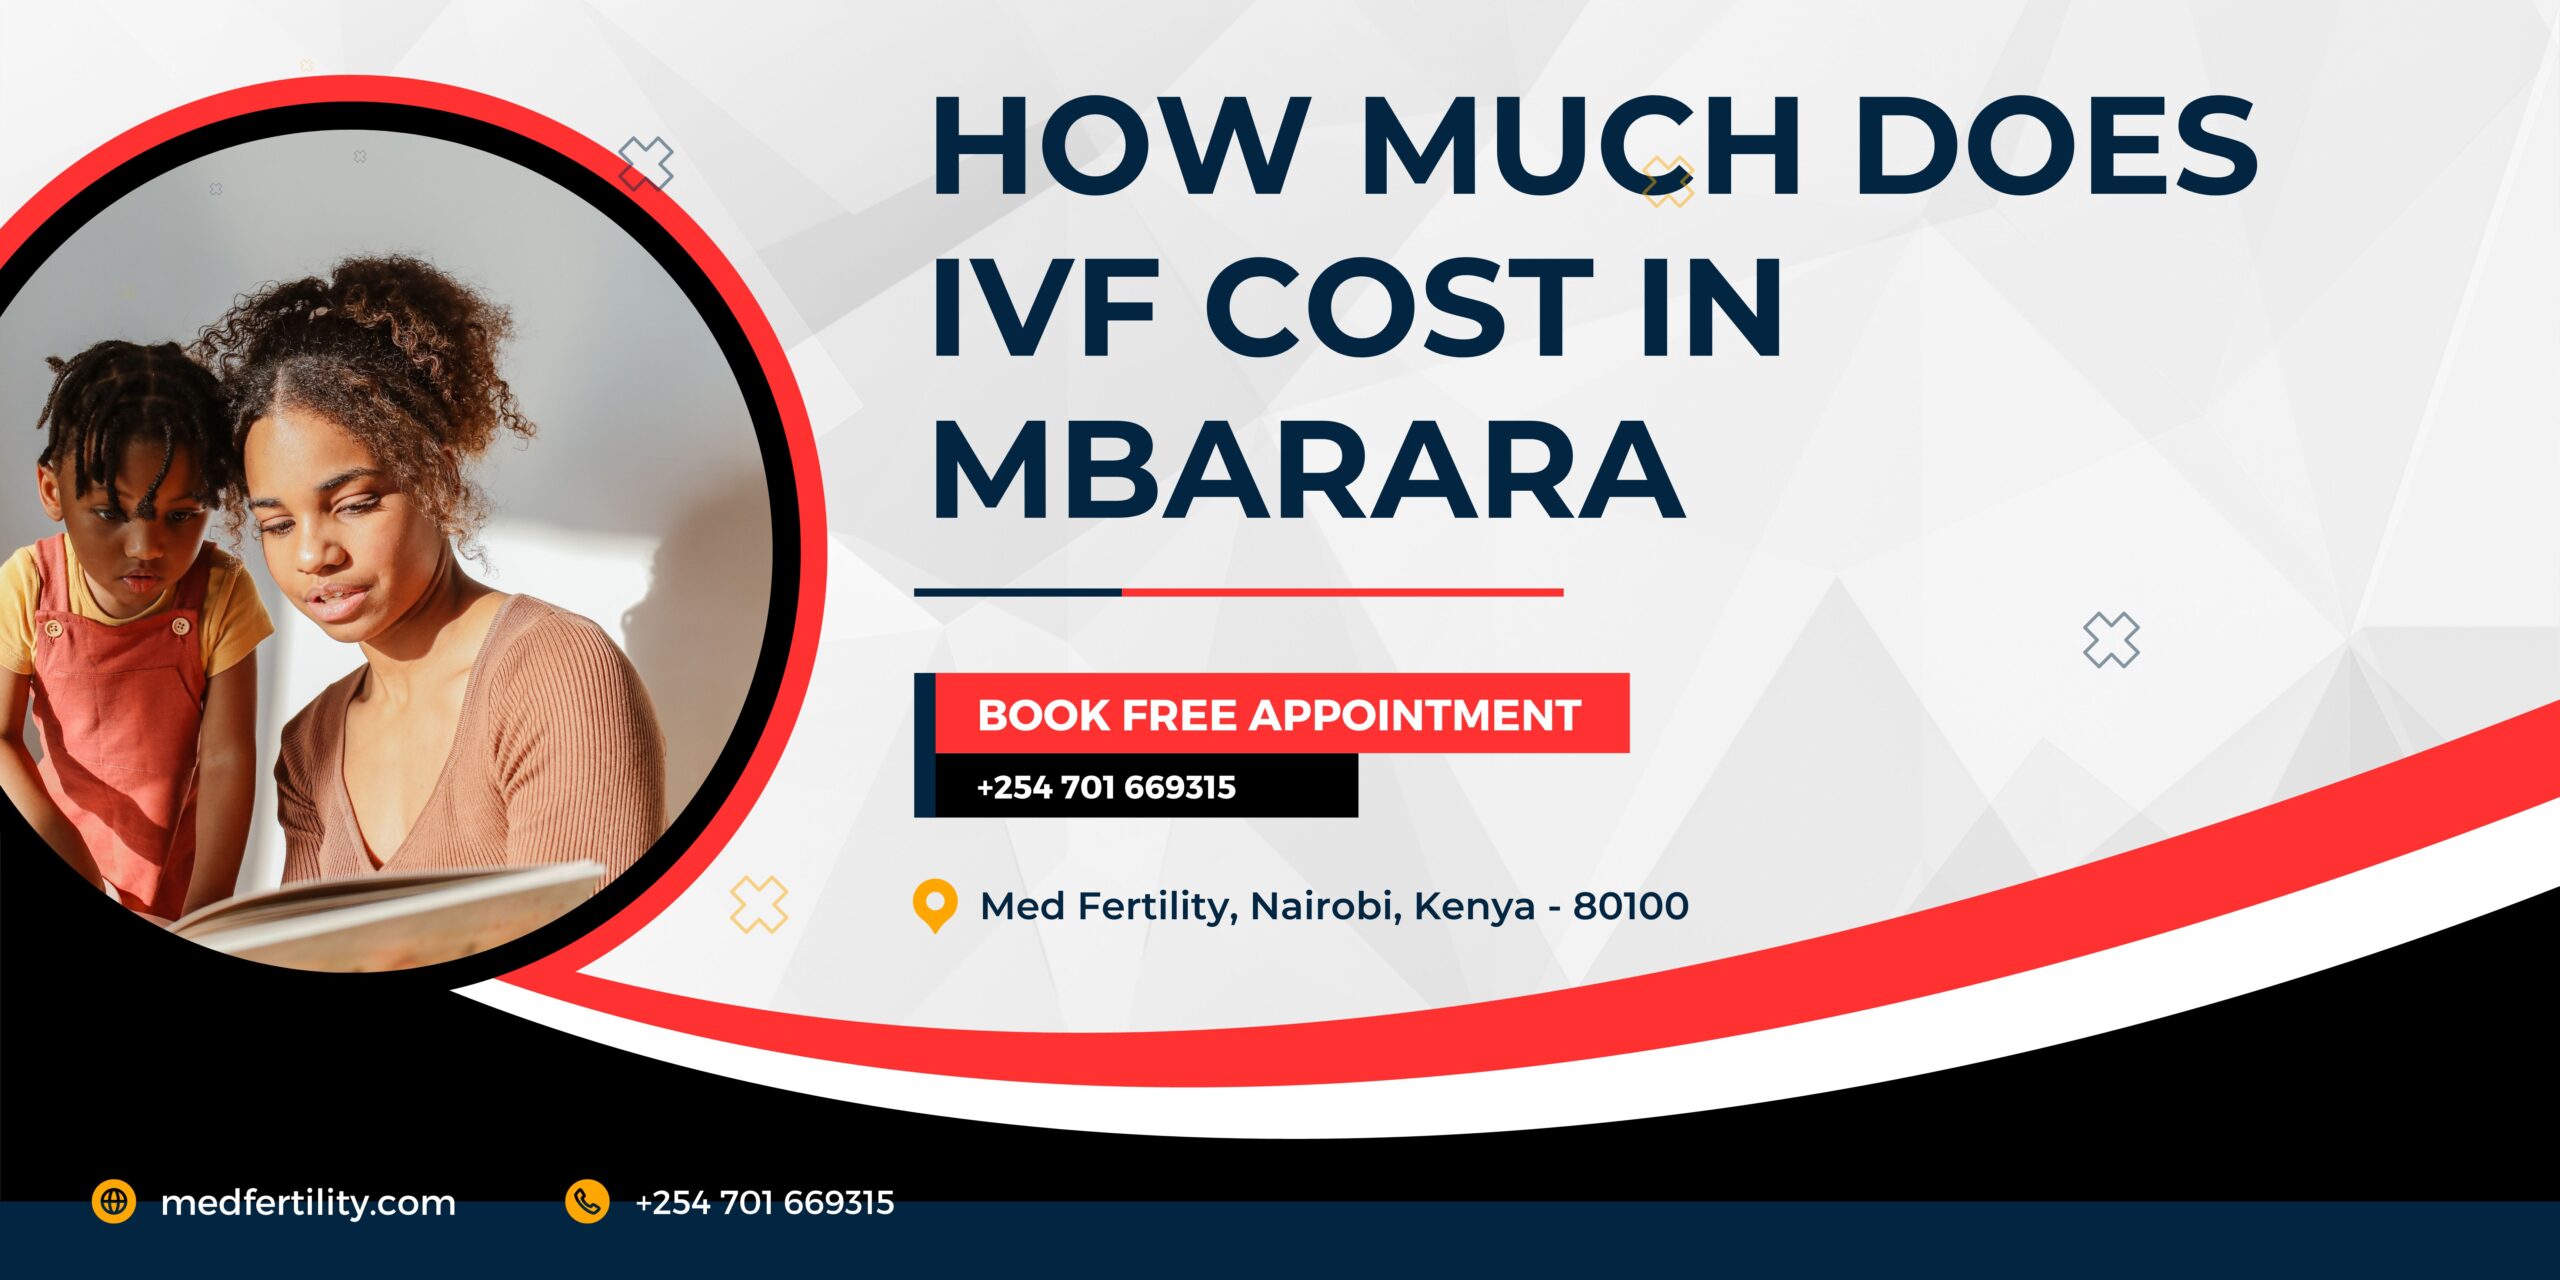 How Much Does IVF Cost in Mbarara 2023